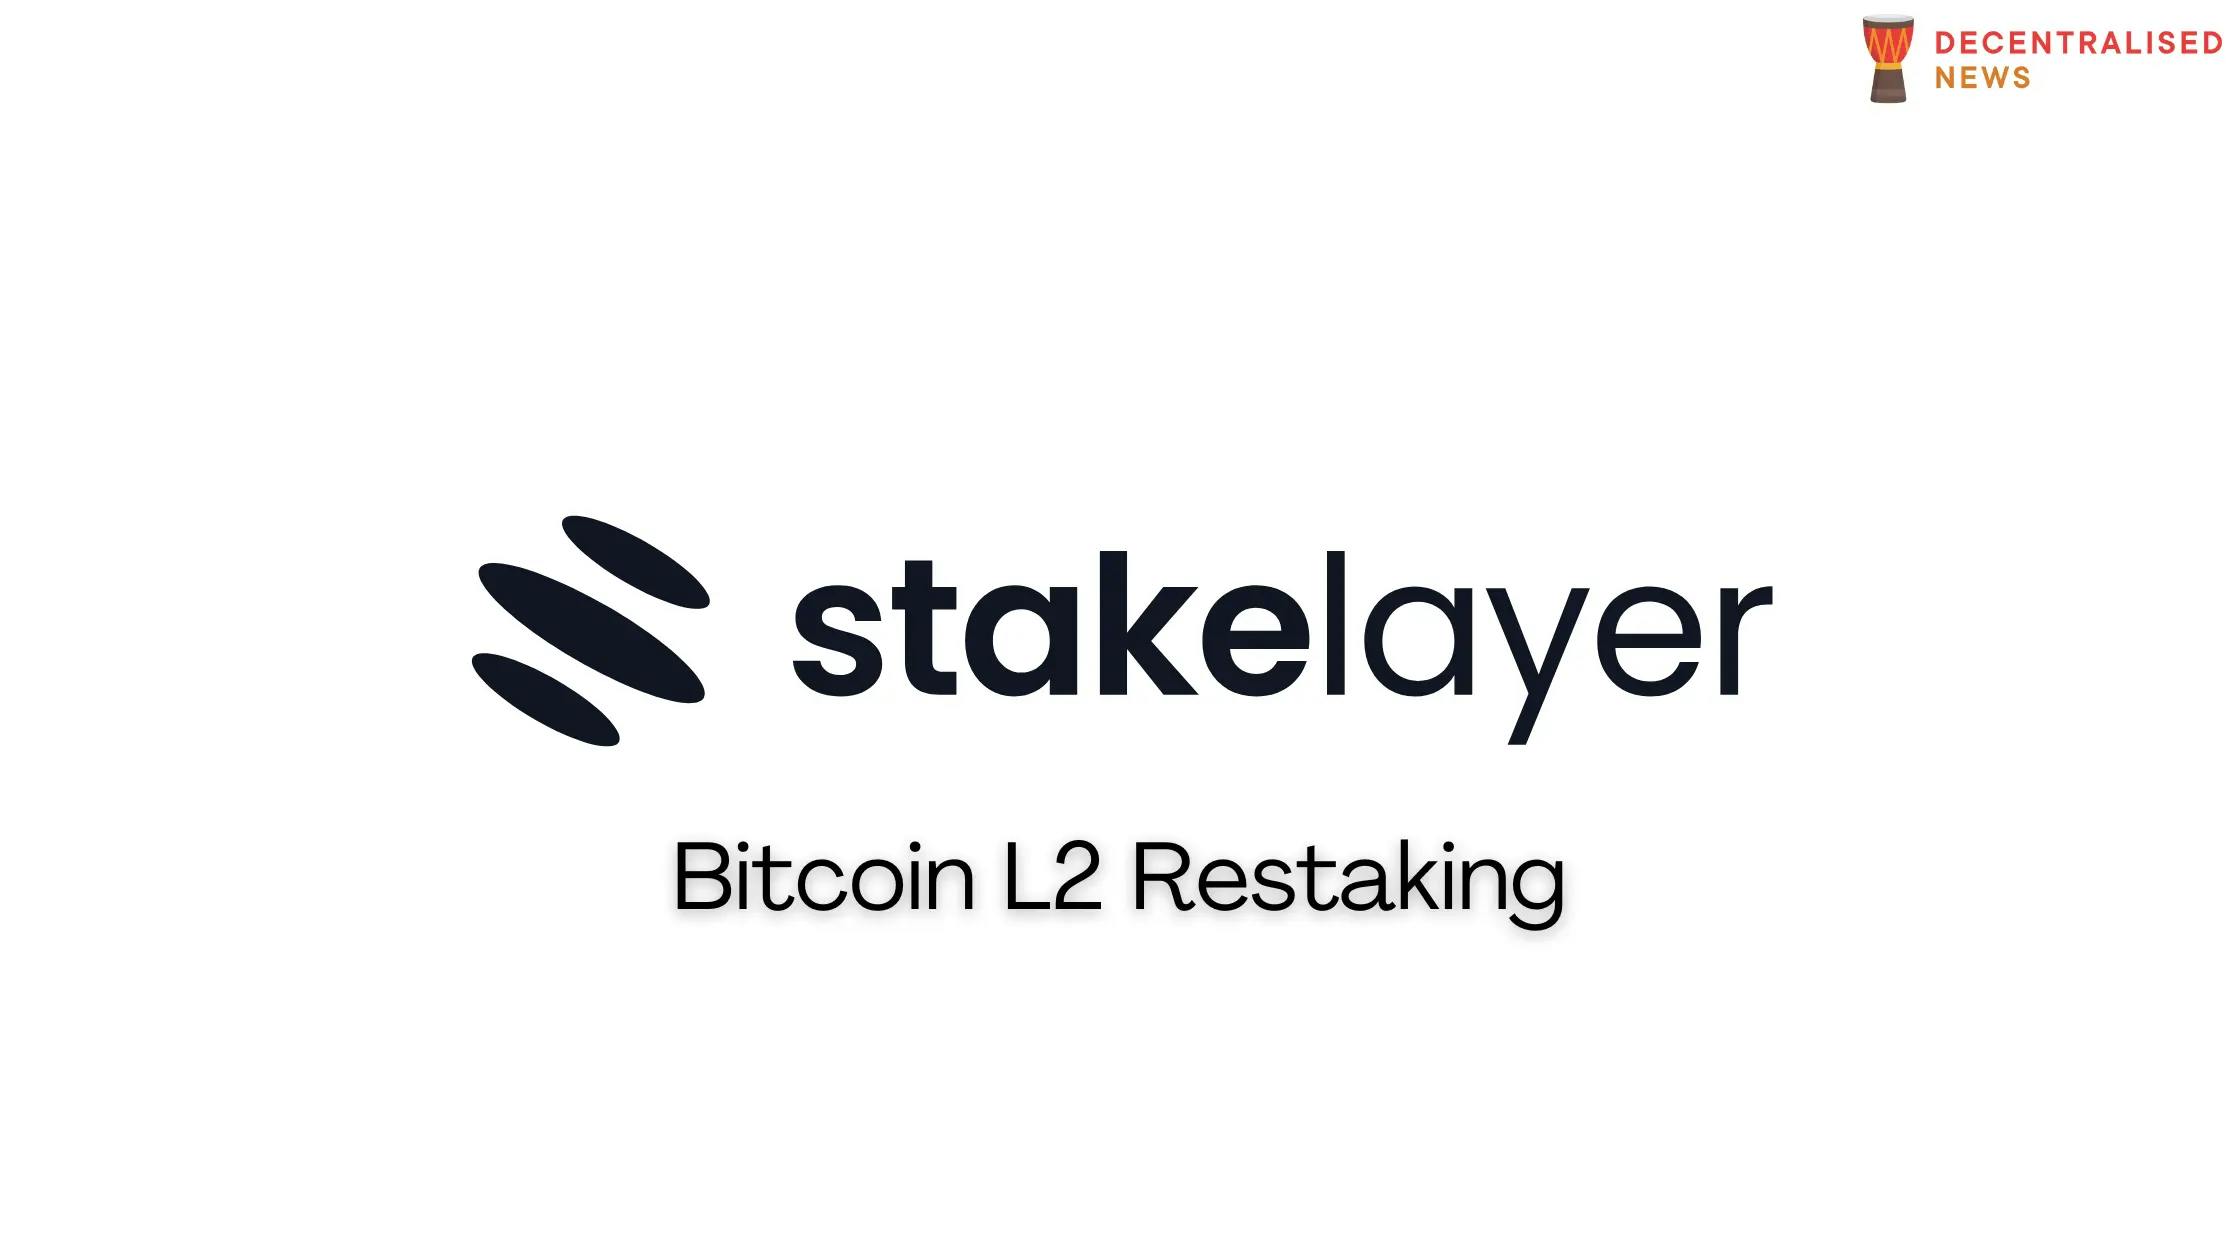 StakeLayer – The Pioneering Bitcoin Restaking L2 Solution